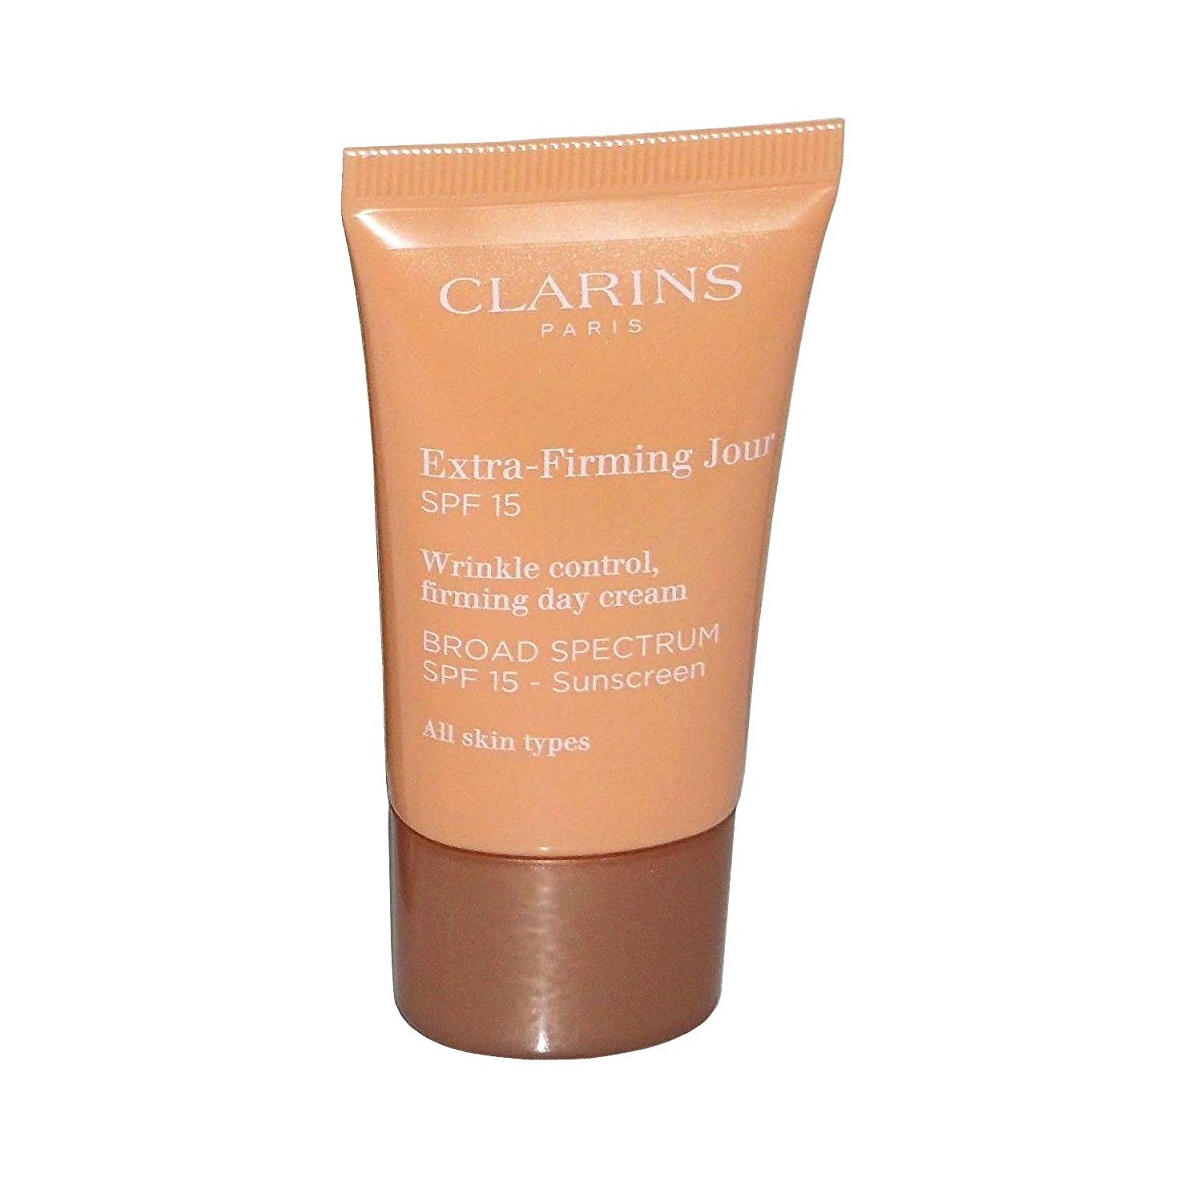 Clarins Extra-Firming Jour Day Cream Mini